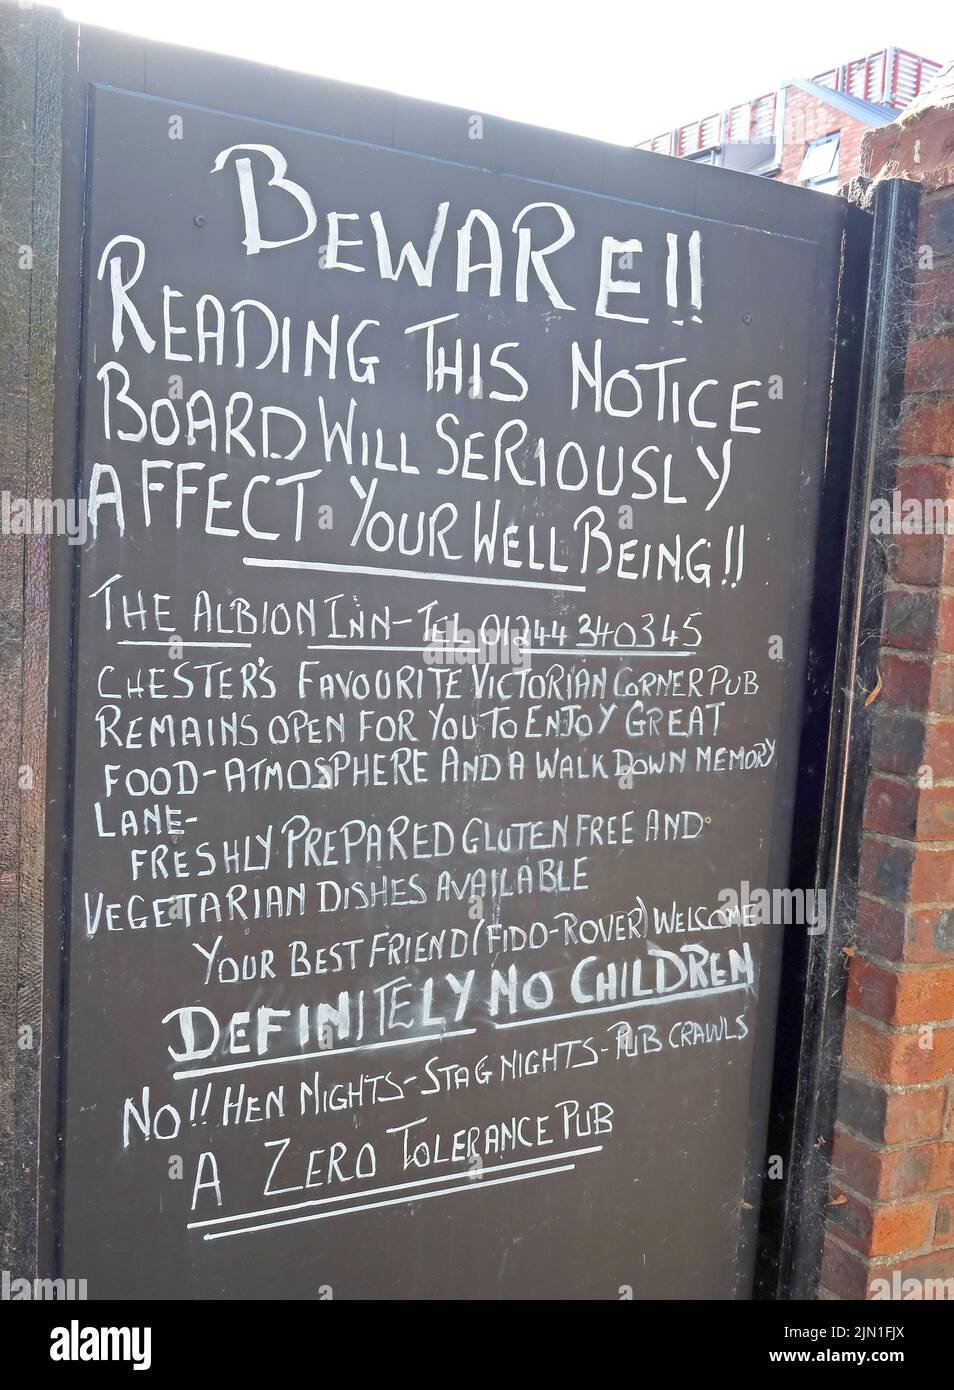 Chalkboard notice & rules at the Albion Inn, Park Street, Chester, Cheshire, England, UK, CH1 1RQ - Beware ! Stock Photo